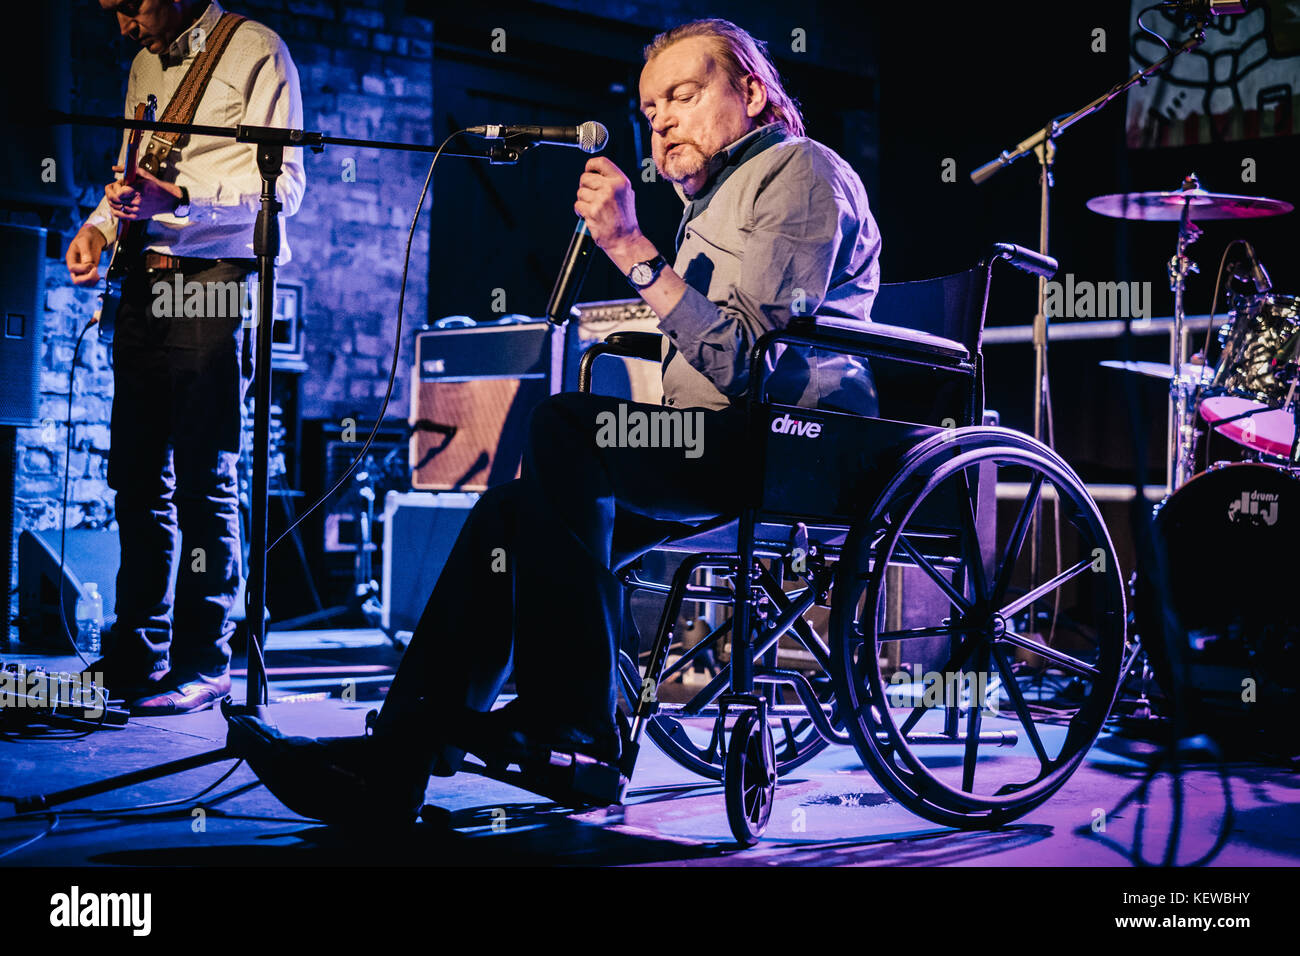 Newcastle, UK. 23rd Oct, 2017. The Fall perform onstage at Boiler Shop, Newcastle Upon Tyne. 23/10/17 Credit: Thomas Jackson/Alamy Live News Stock Photo